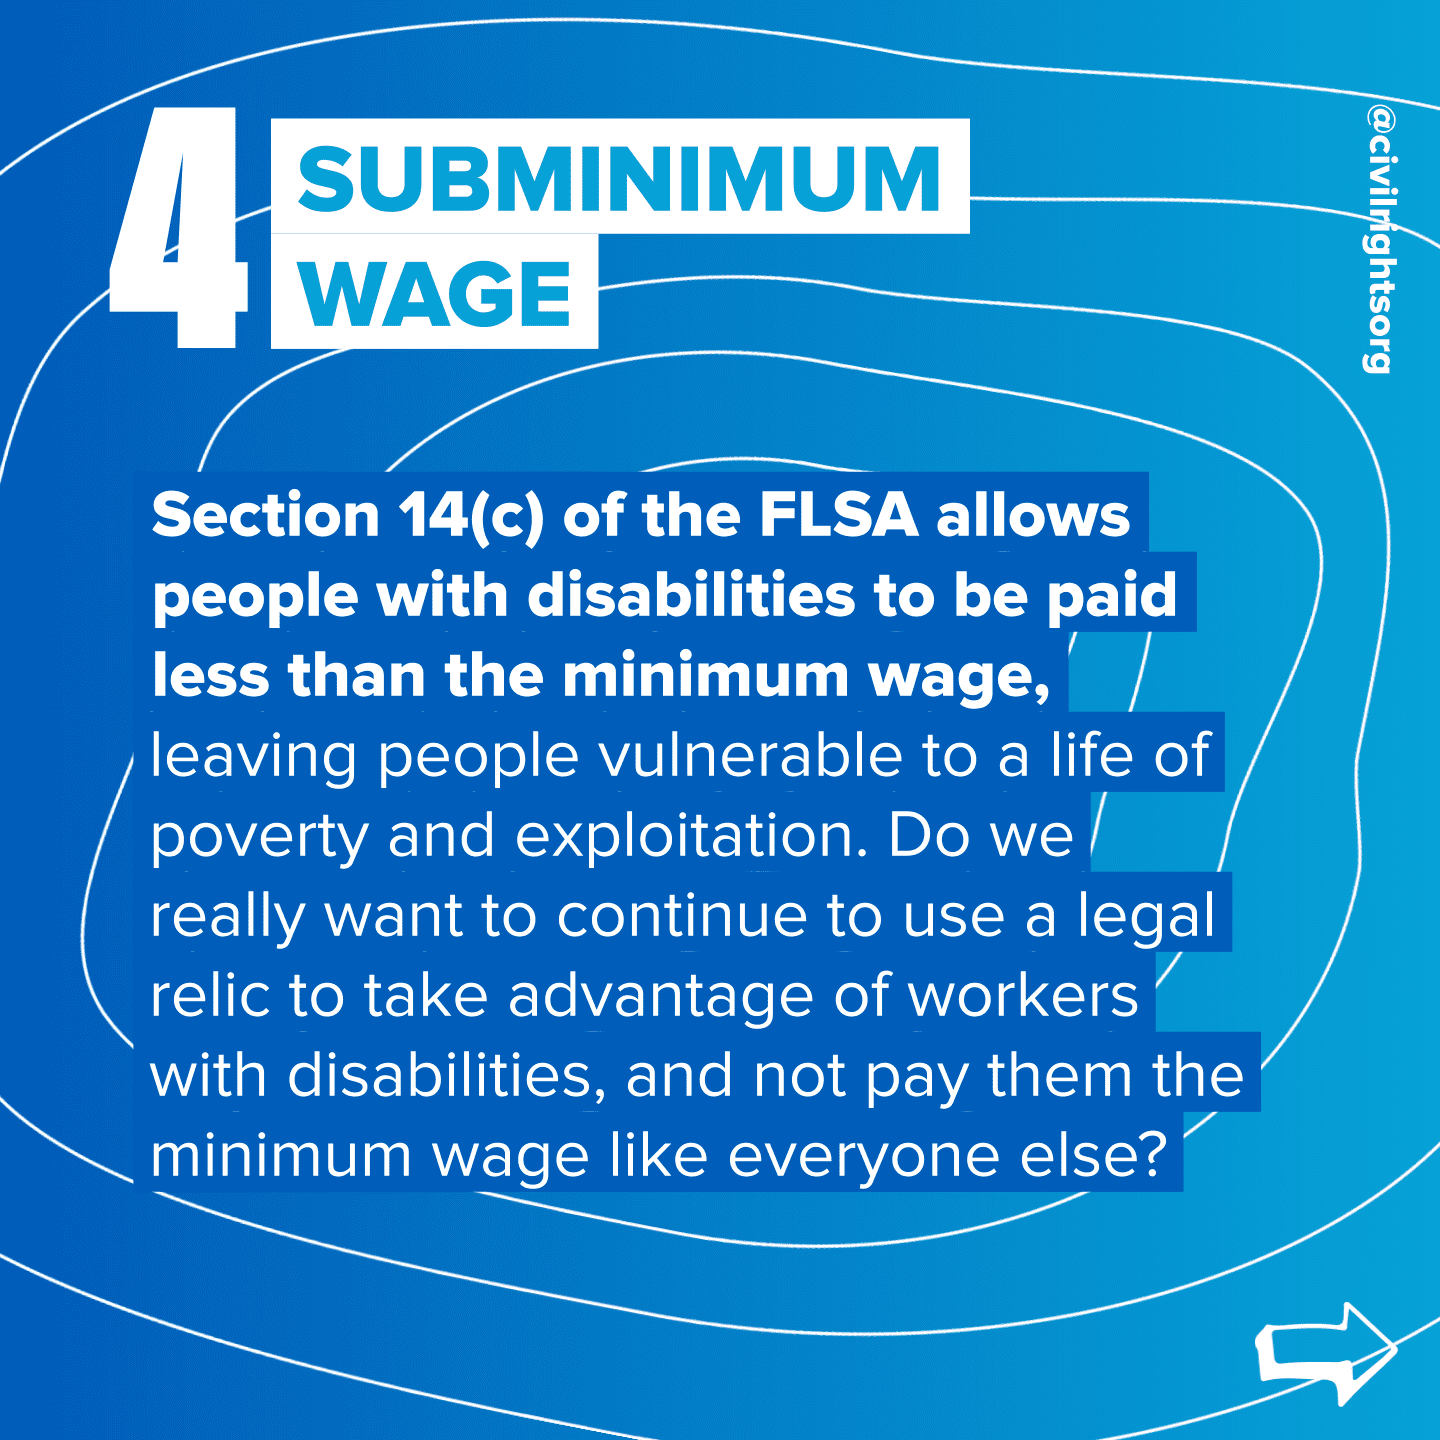 Number 4. Title “Subminimum Wage,” Section 14(c) of the FLSA allows people with disabilities to be paid less than the minimum wage, leaving people vulnerable to a life of poverty and exploitation. Do we really want to continue to use a legal relic to take advantage of workers with disabilities, and not pay them the minimum wage like everyone else? Swipe right arrow.